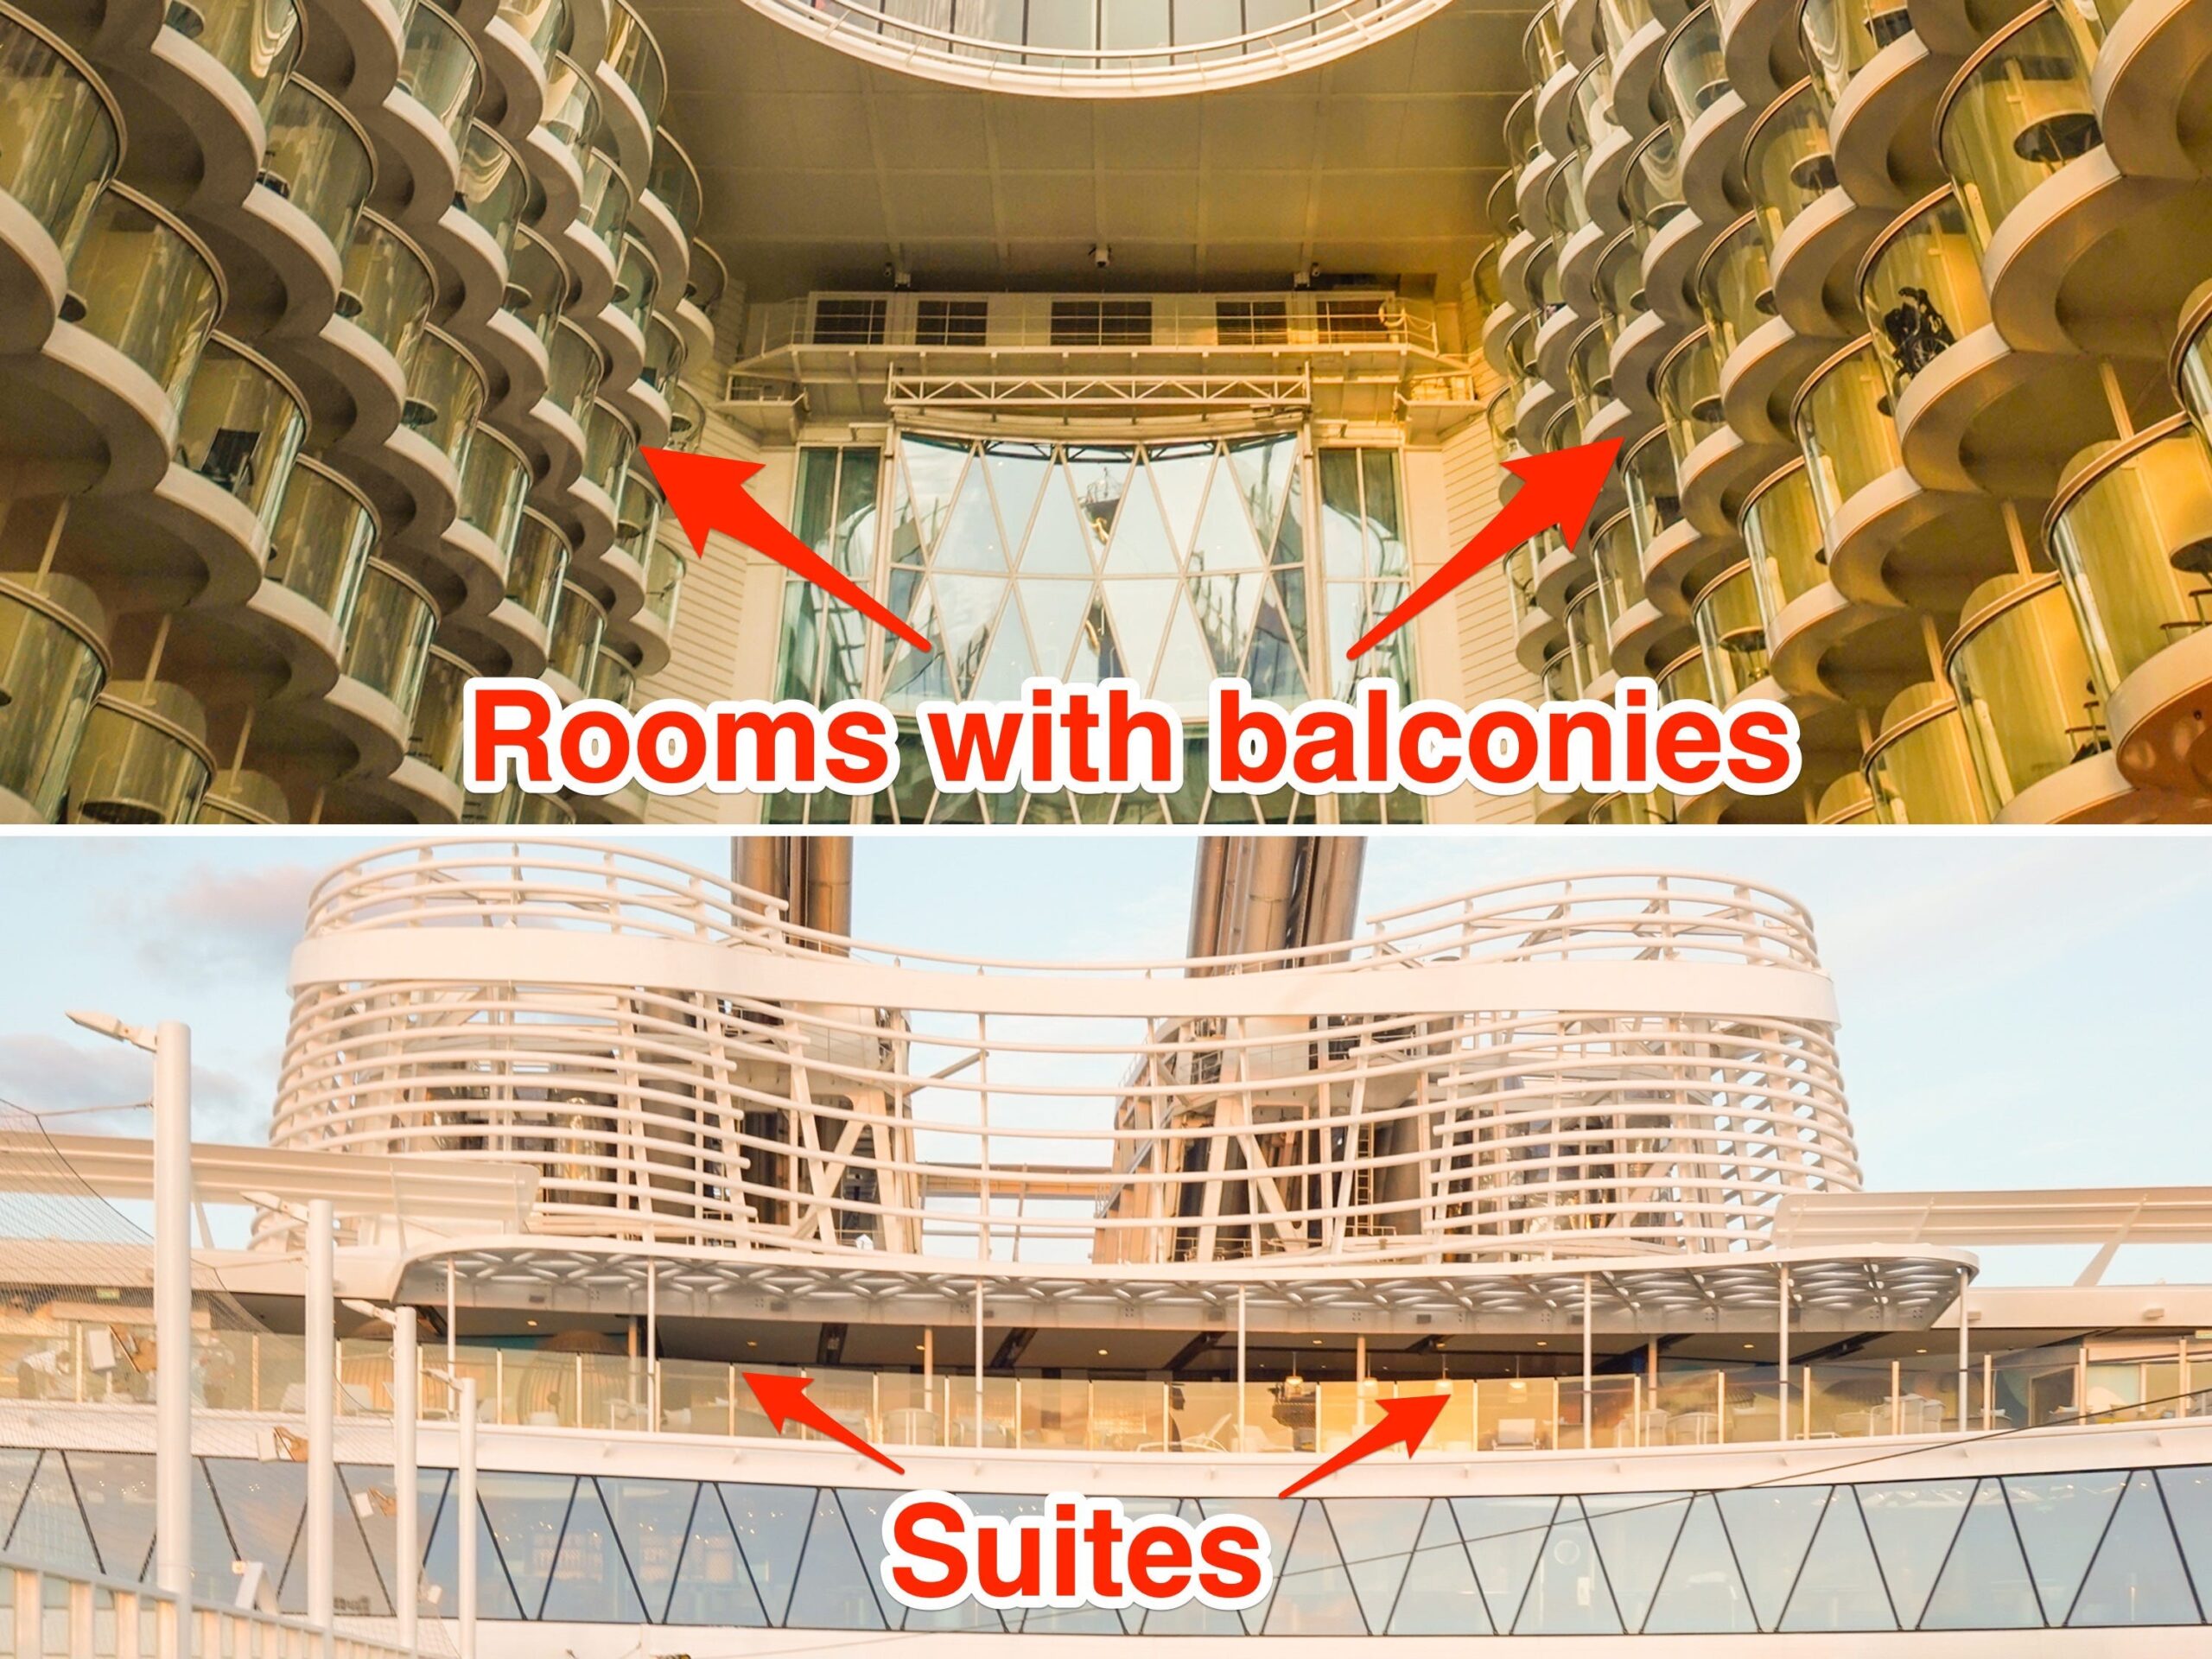 Arrows point to rooms with balconies (top) and rooms with suites (bottom) on the world&#39;s largest cruise ship